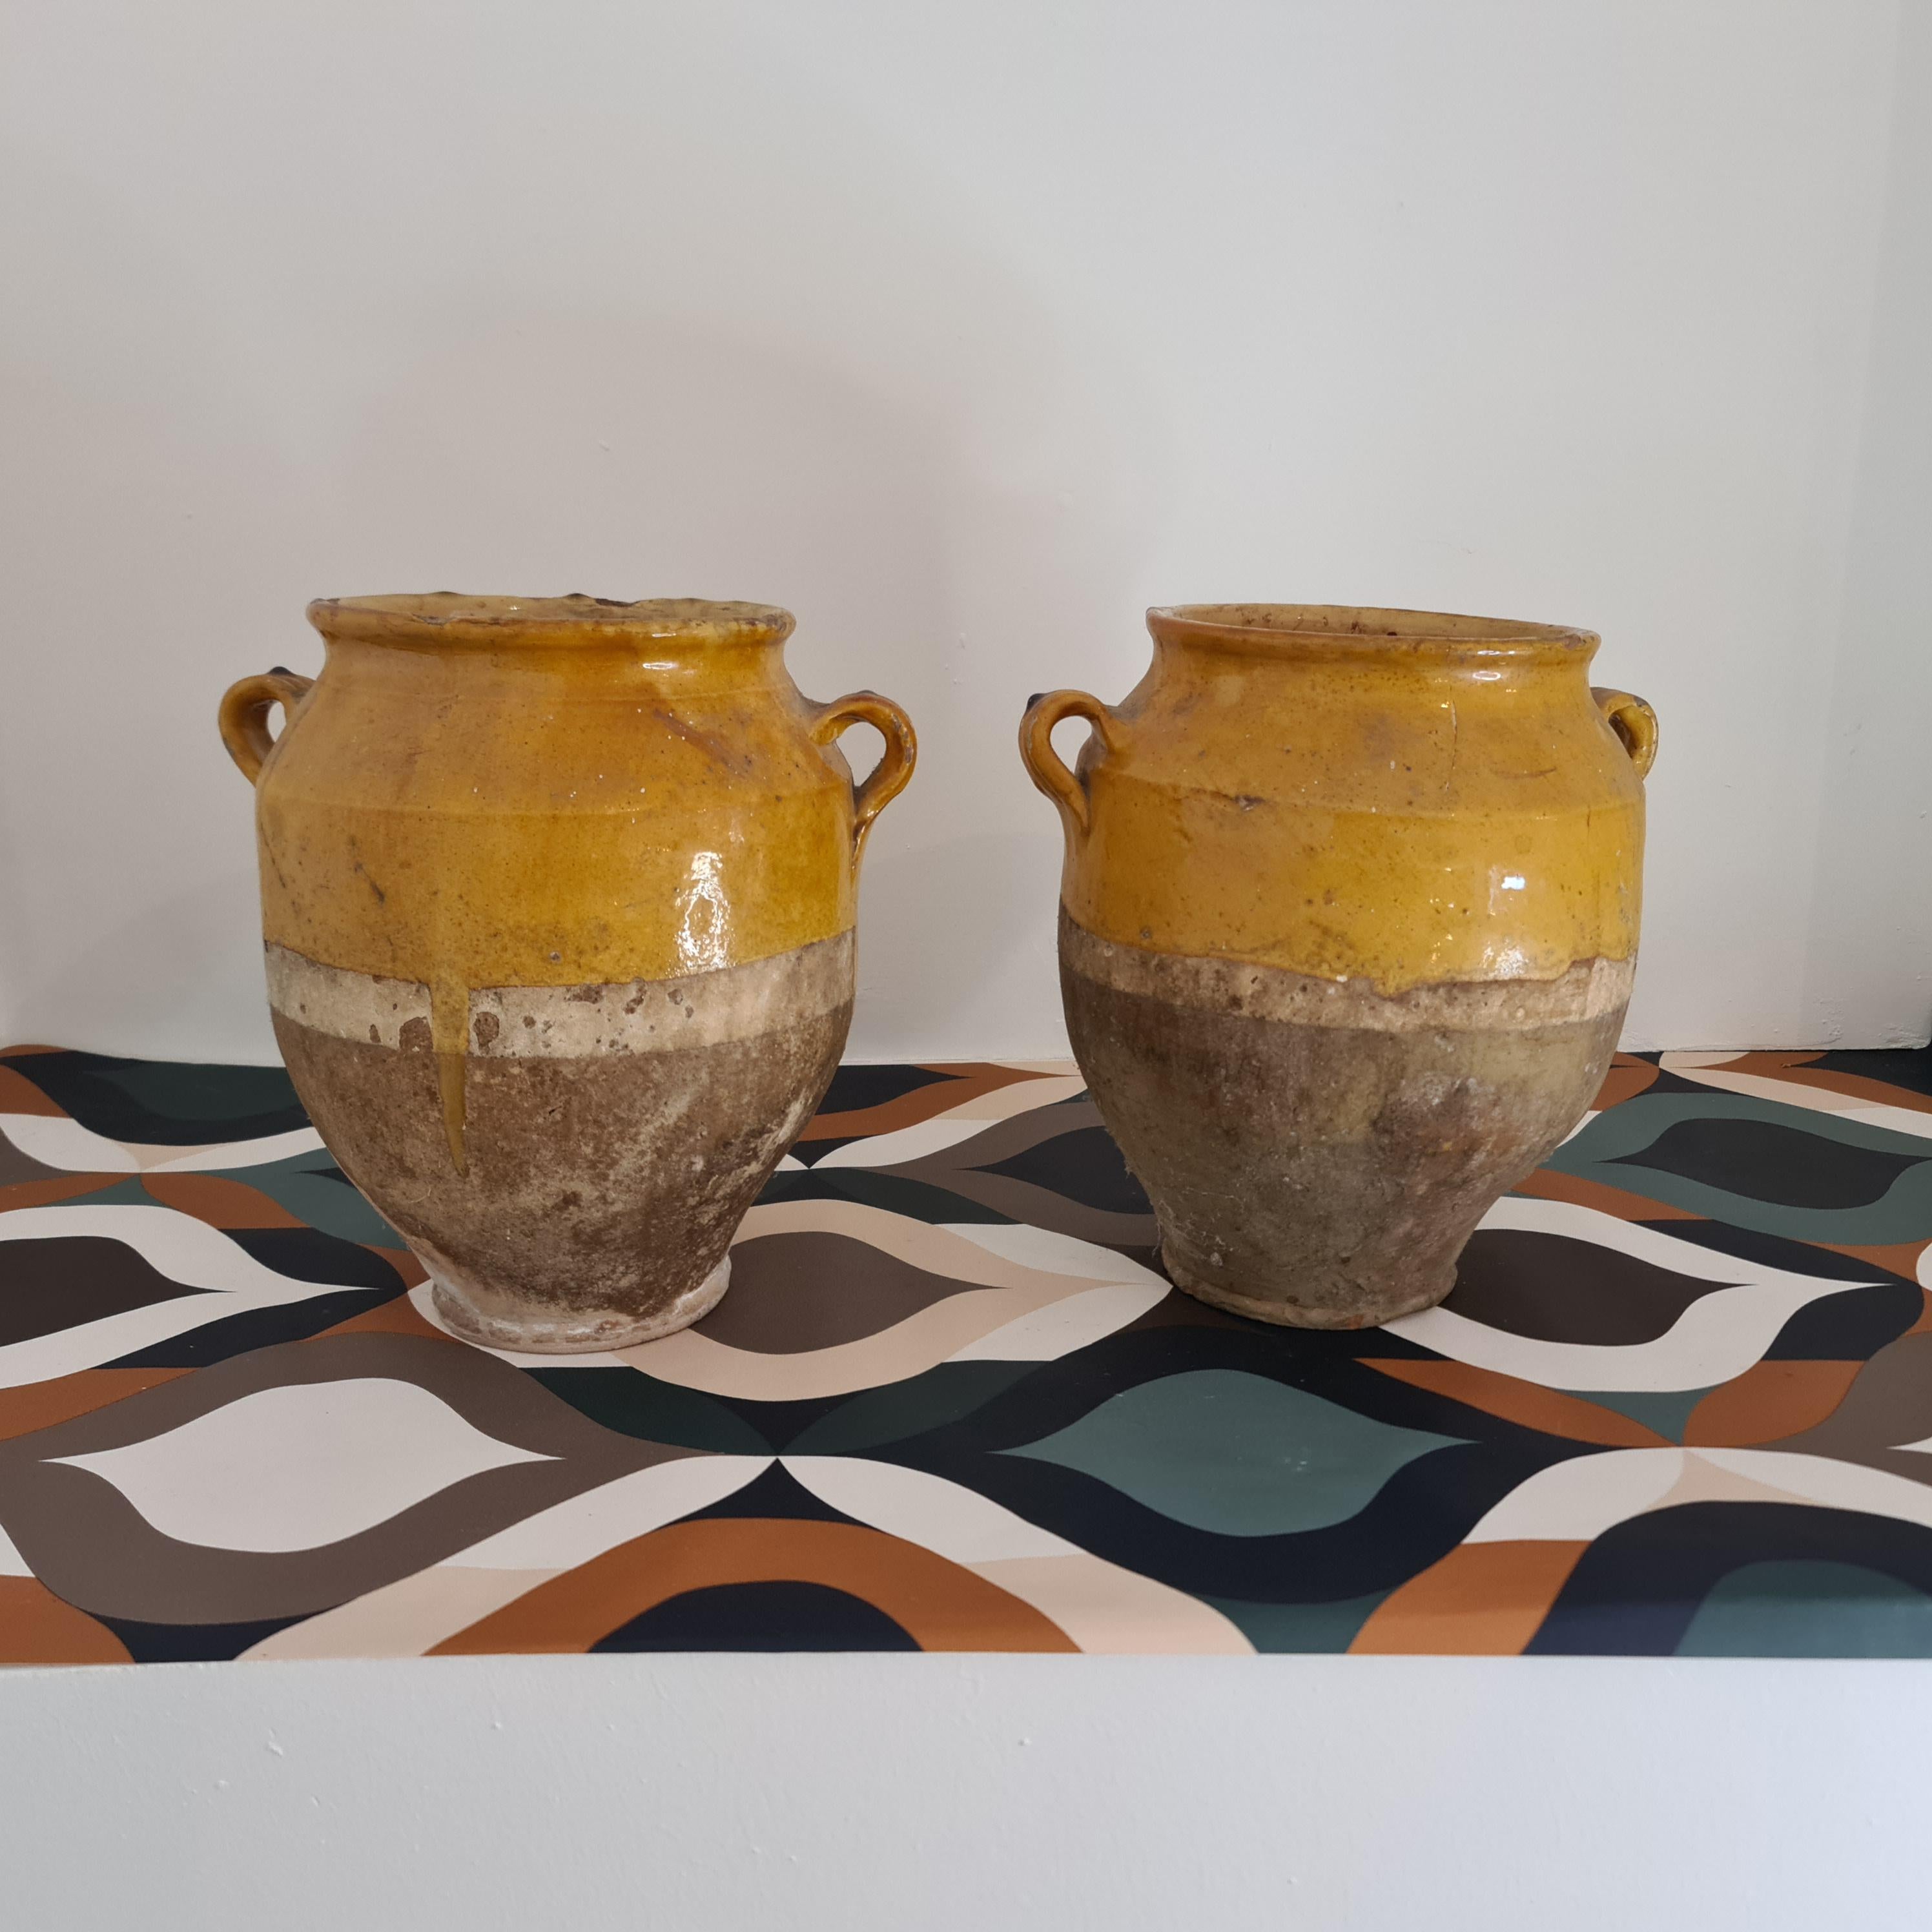 pair of French jars from the 19th century. Provencal glazed pottery with 2 handles, some lacks in the glaze consistent with age and use
In southern France in the mid 19th century these mustard-coloured pottery vessels were used to store meat
These